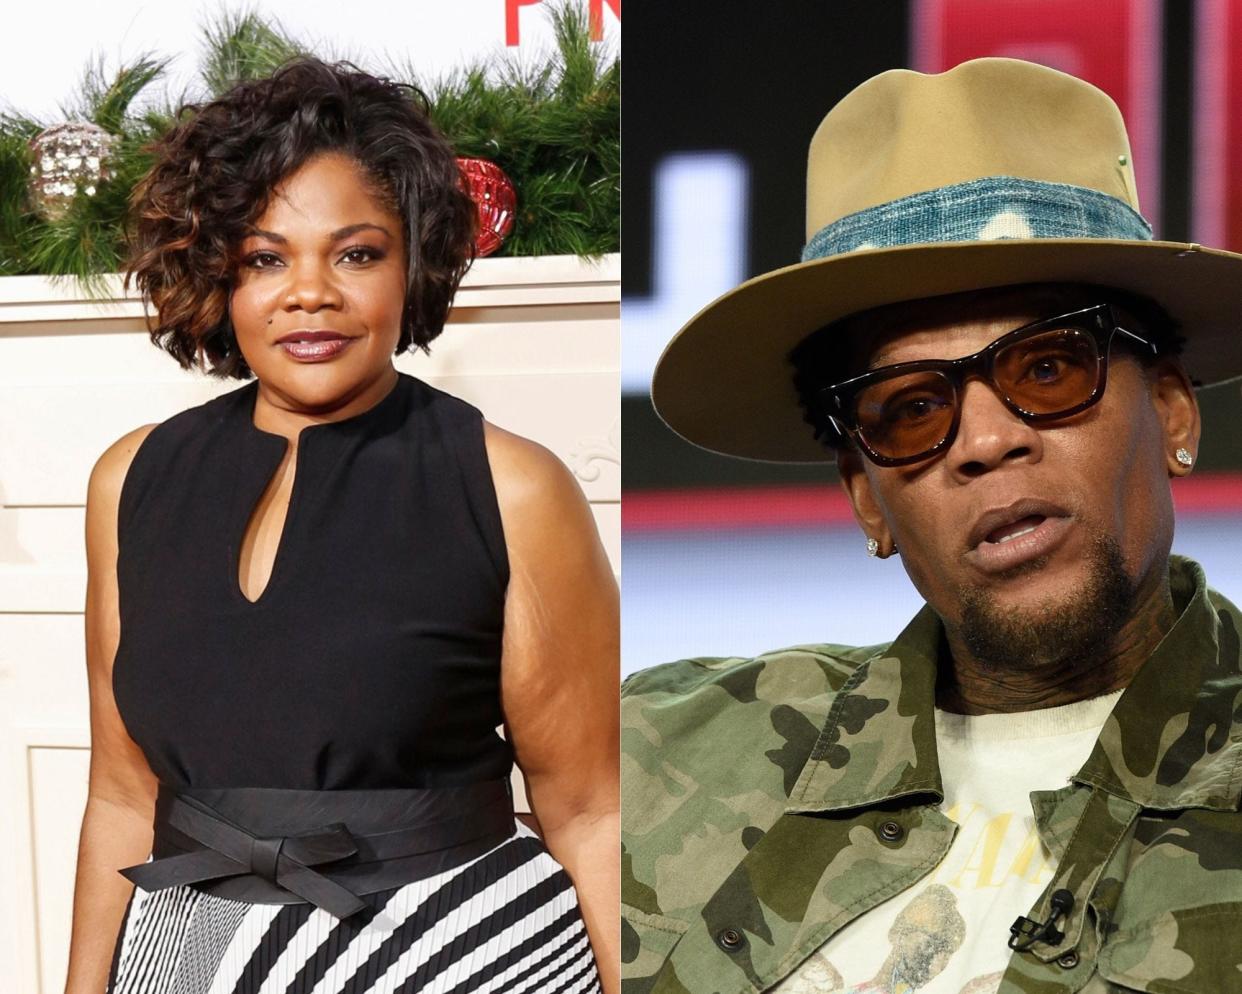 Comedians Mo'Nique, left, and D.L. Hughley have found themselves in a heated online feud. Mo’Nique alleged during a performance on May 28, 2022, that she was supposed to be the headline performer at The Comedy Explosion but that Hughley refused to perform at the event if Mo’Nique remained the headliner.